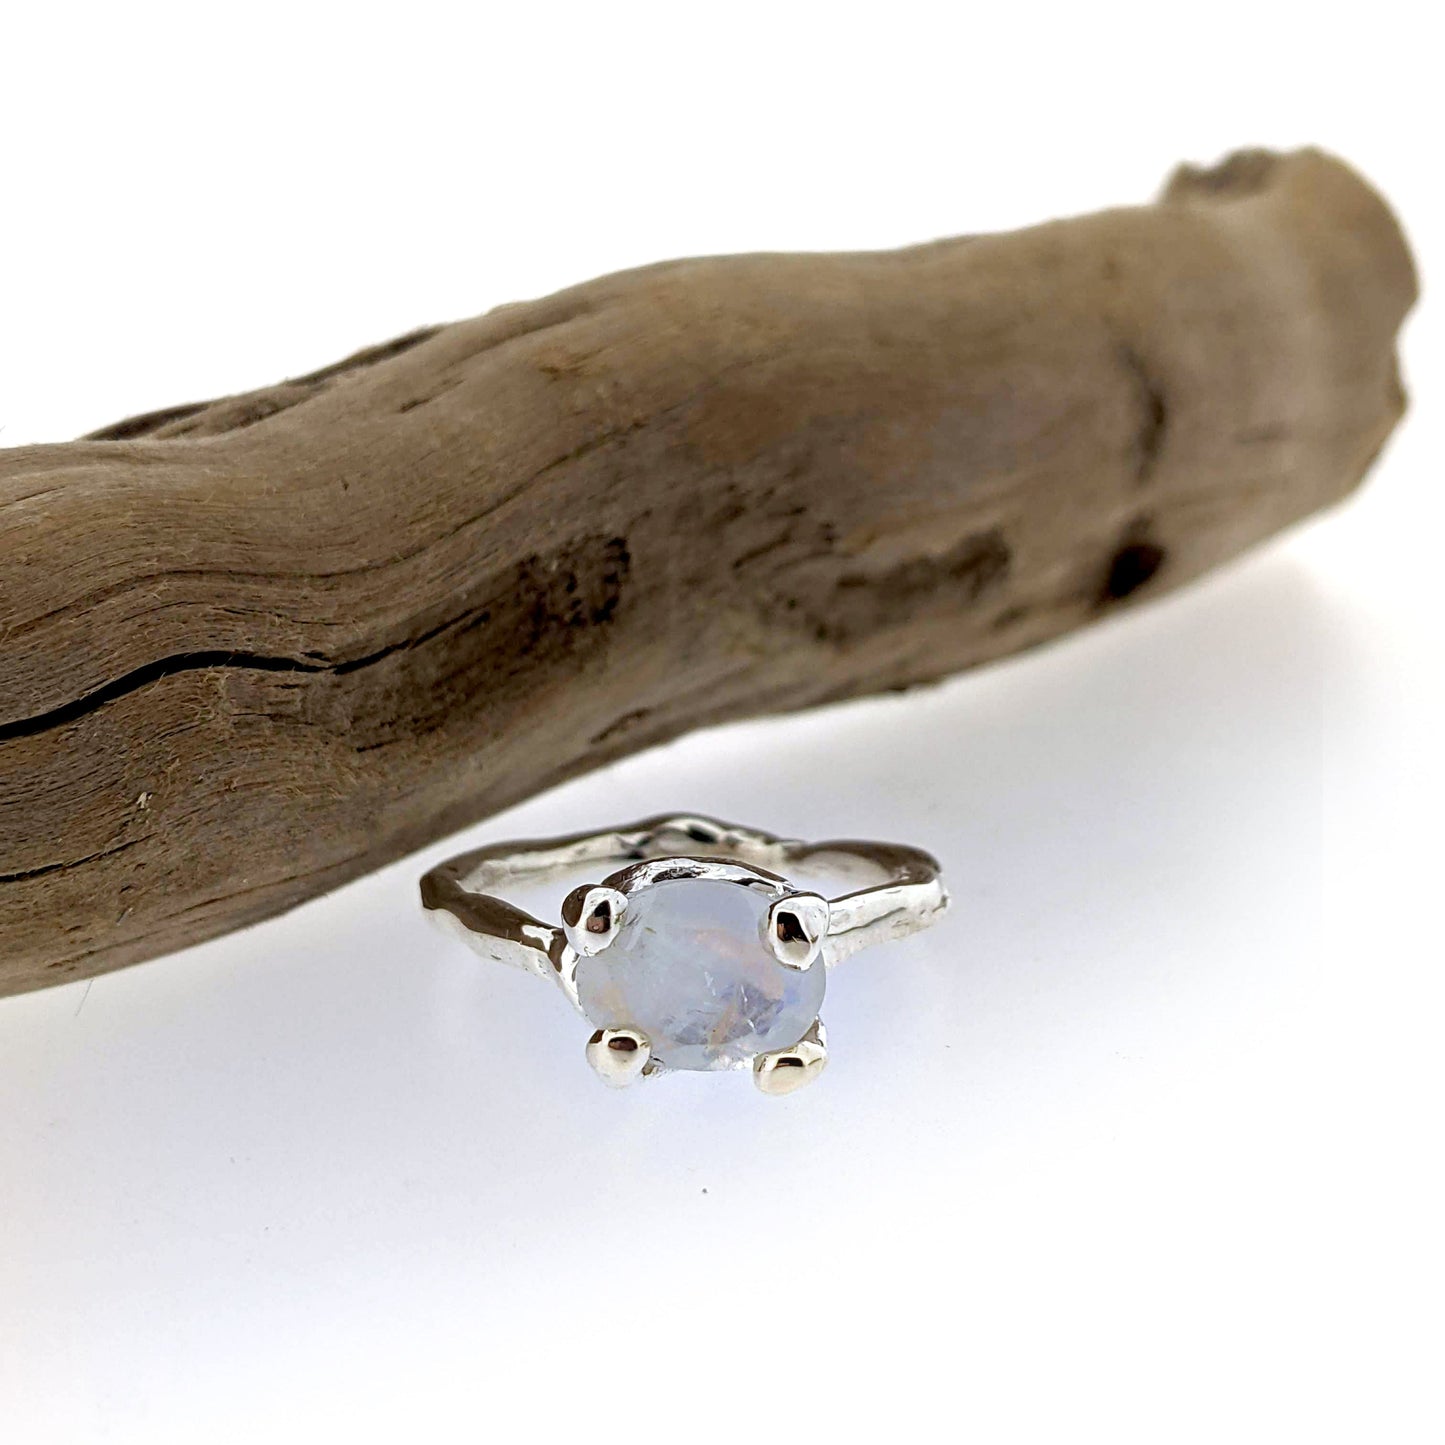 organic design rainbow moonstone and sterling silver solitaire ring, shown displayed next to driftwood.